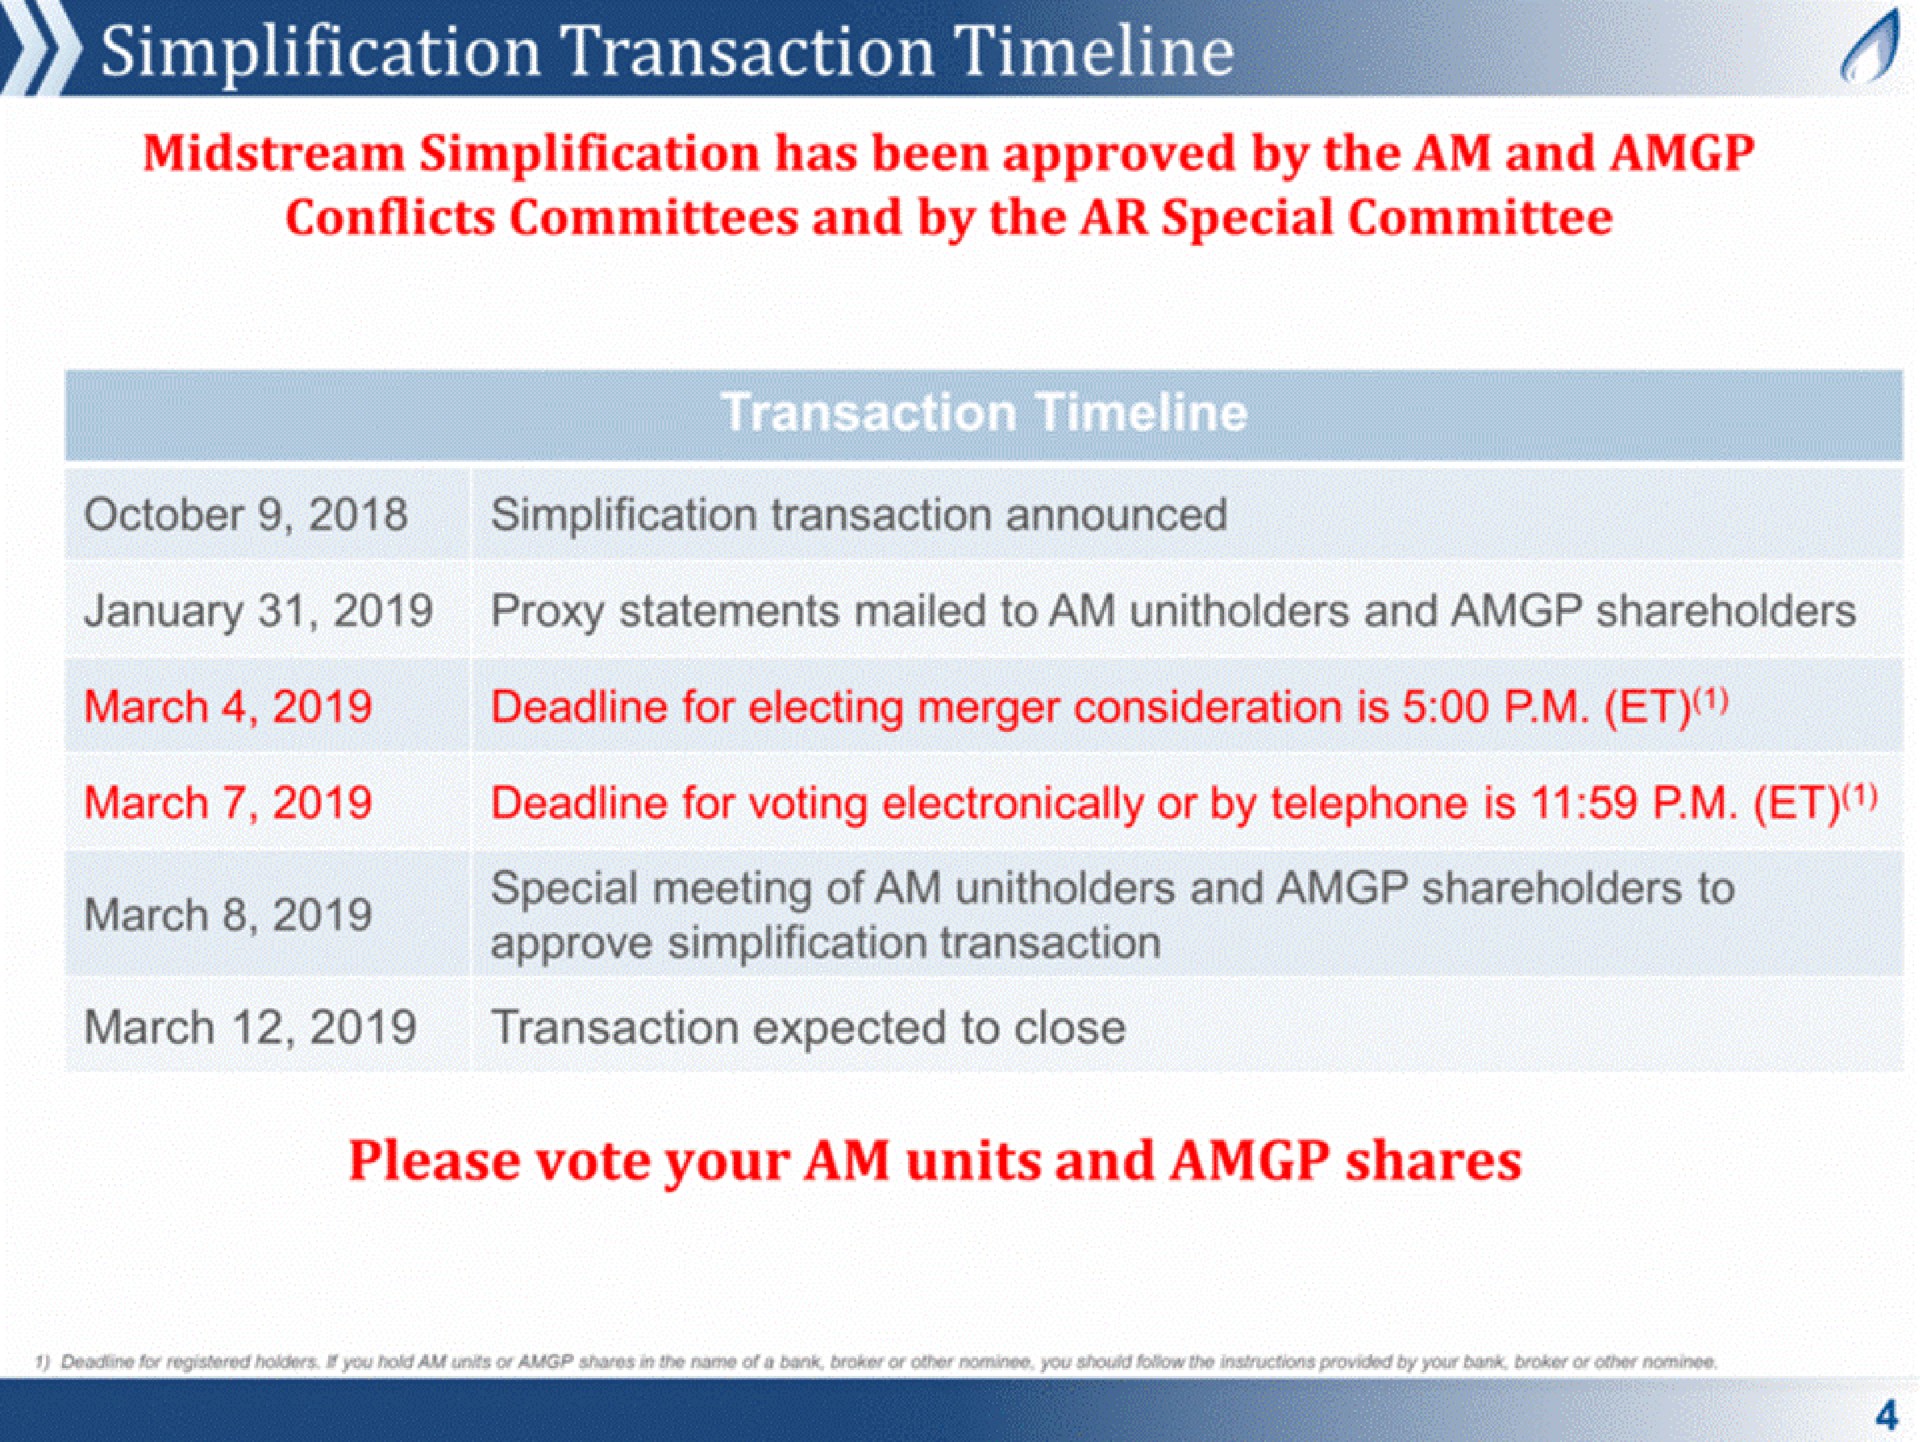 simplification transaction a midstream simplification has been approved by the am and conflicts committees and by the special committee please vote your am units and shares | Antero Midstream Partners